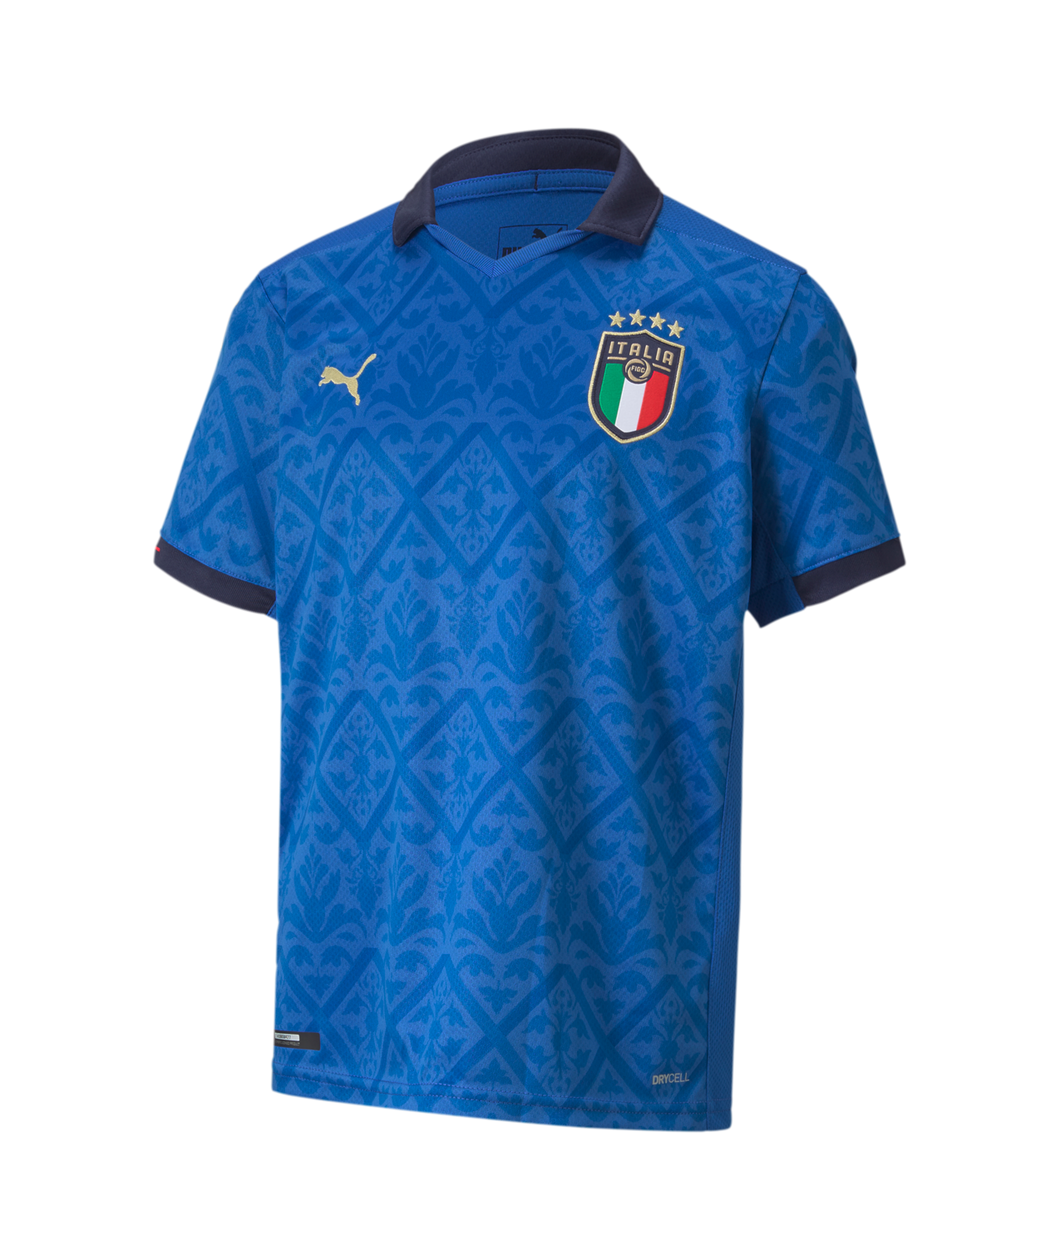 Puma Youth Italy Home Jersey 2020 Blue 75644601